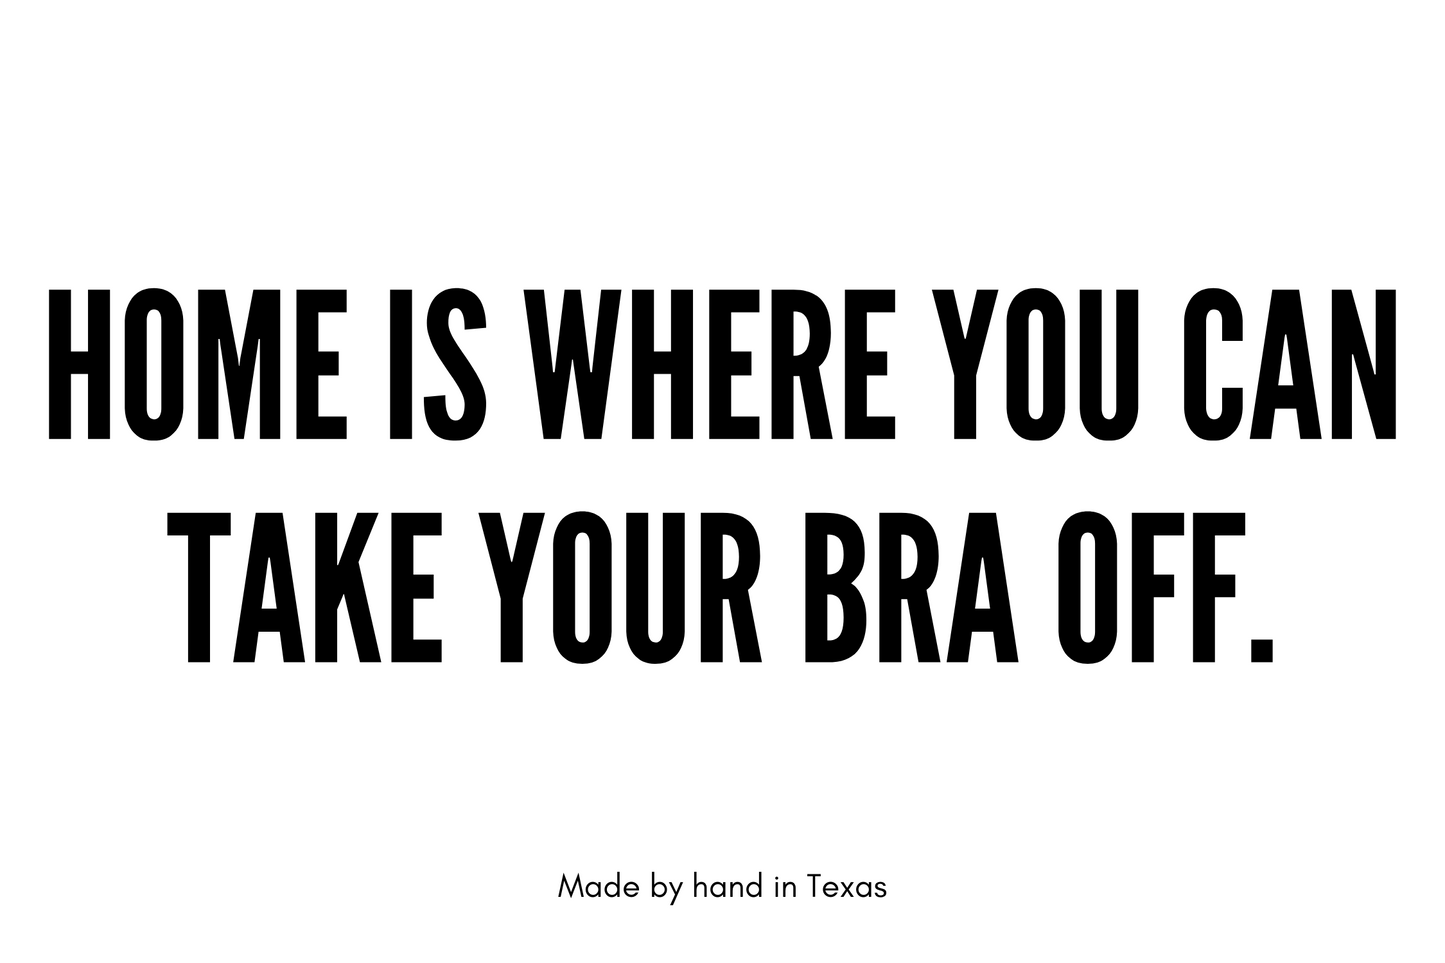 Home is where you can take your bra off.